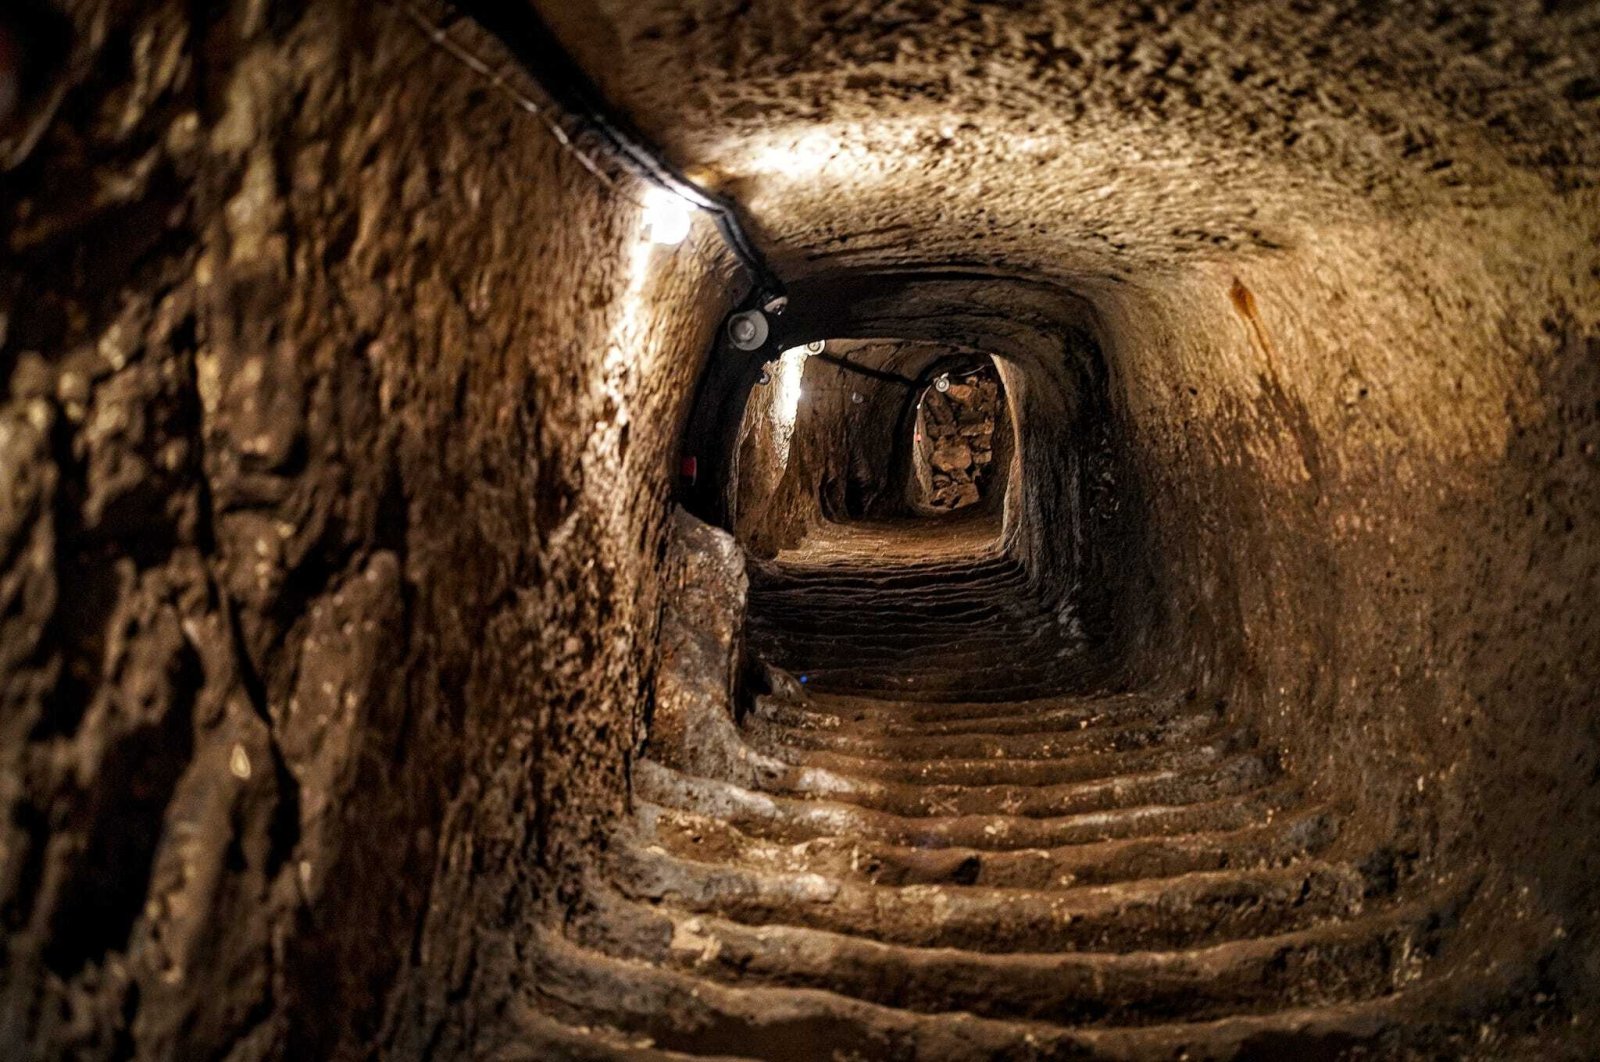 Gaziantep Castle&#039;s extensive tunnels and caves have been unearthed after two years of excavations, Gaziantep, southeastern Türkiye, Aug. 17, 2022. (Photo by Uğur Yıldırım)